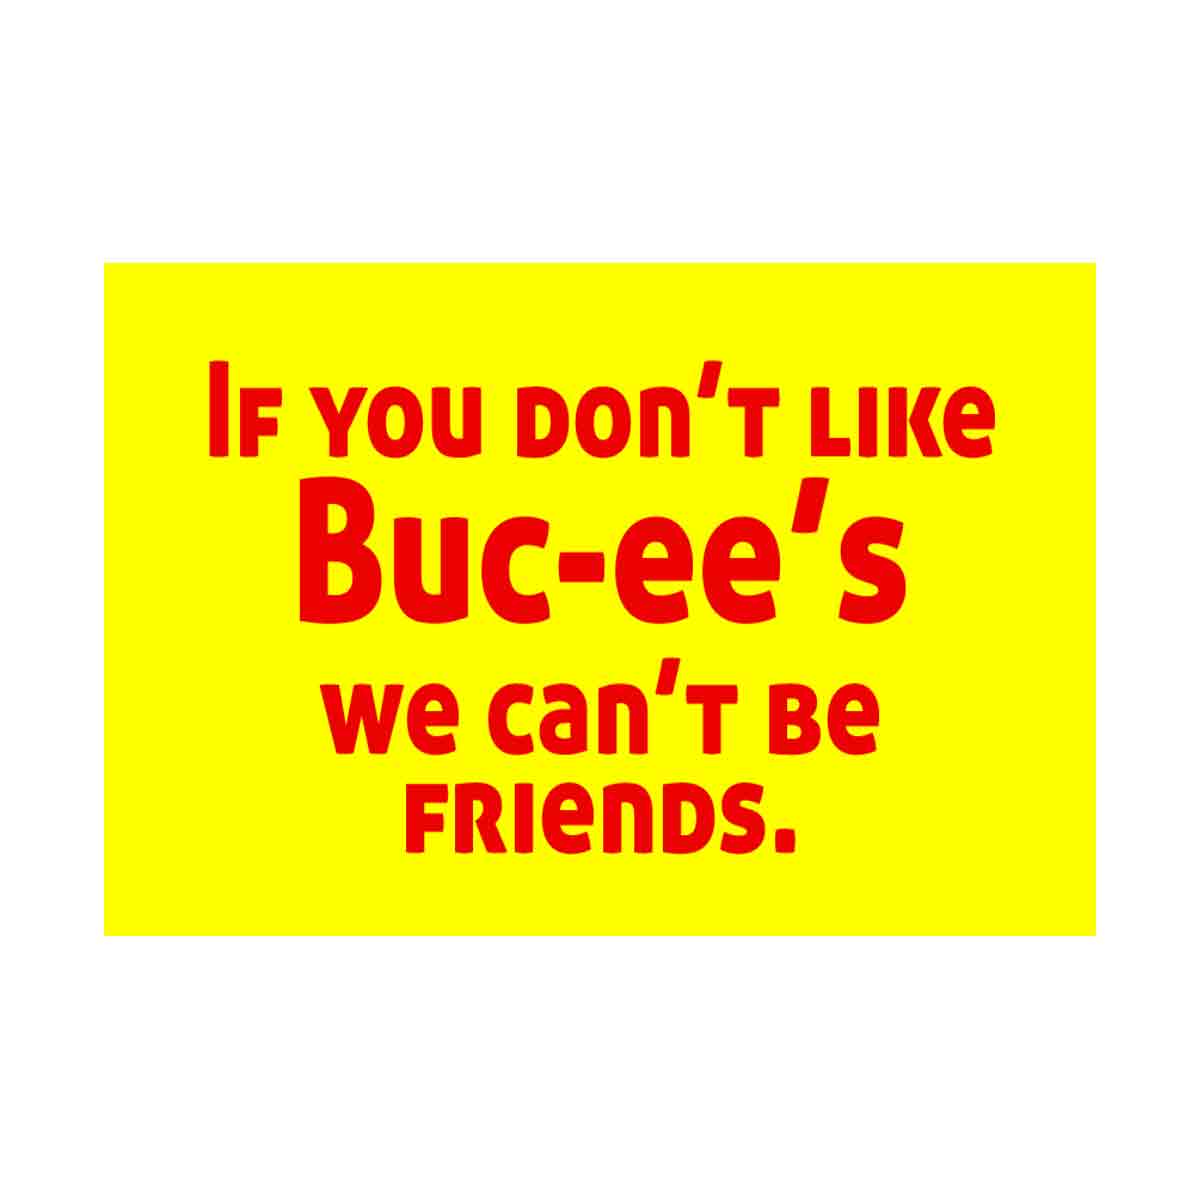 If you don't like Bucees friends